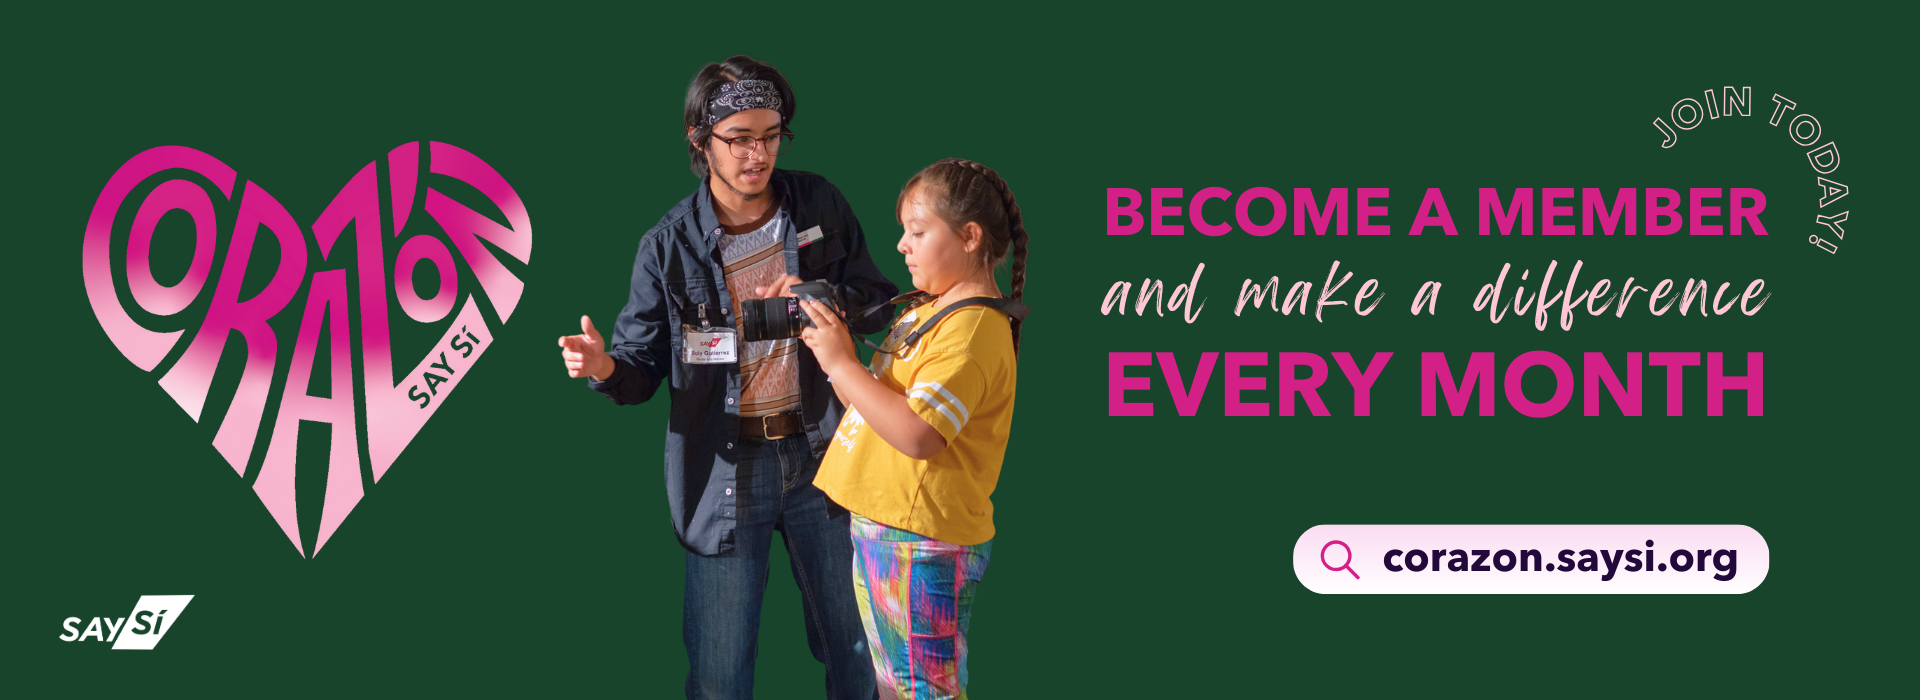 This is a graphic with image and text. It reads "Become a member and make a difference every month. Join CORAZÓN today at corazon.saysi.org!"